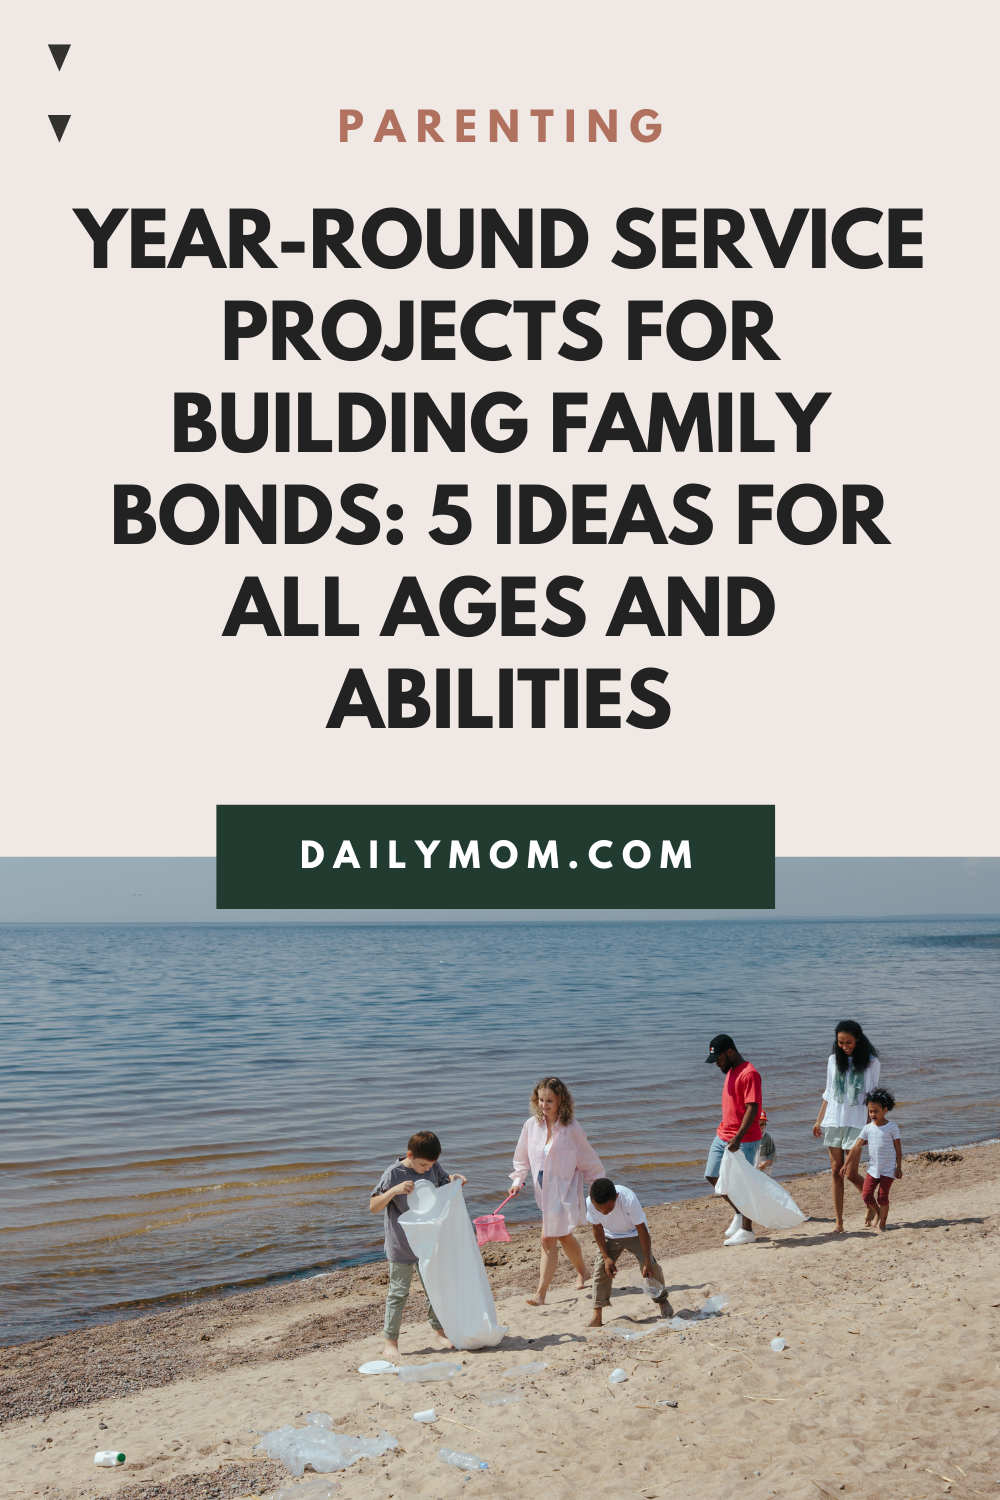 Year-Round Service Projects For Building Family Bonds: 5 Ideas For All Ages And Abilities